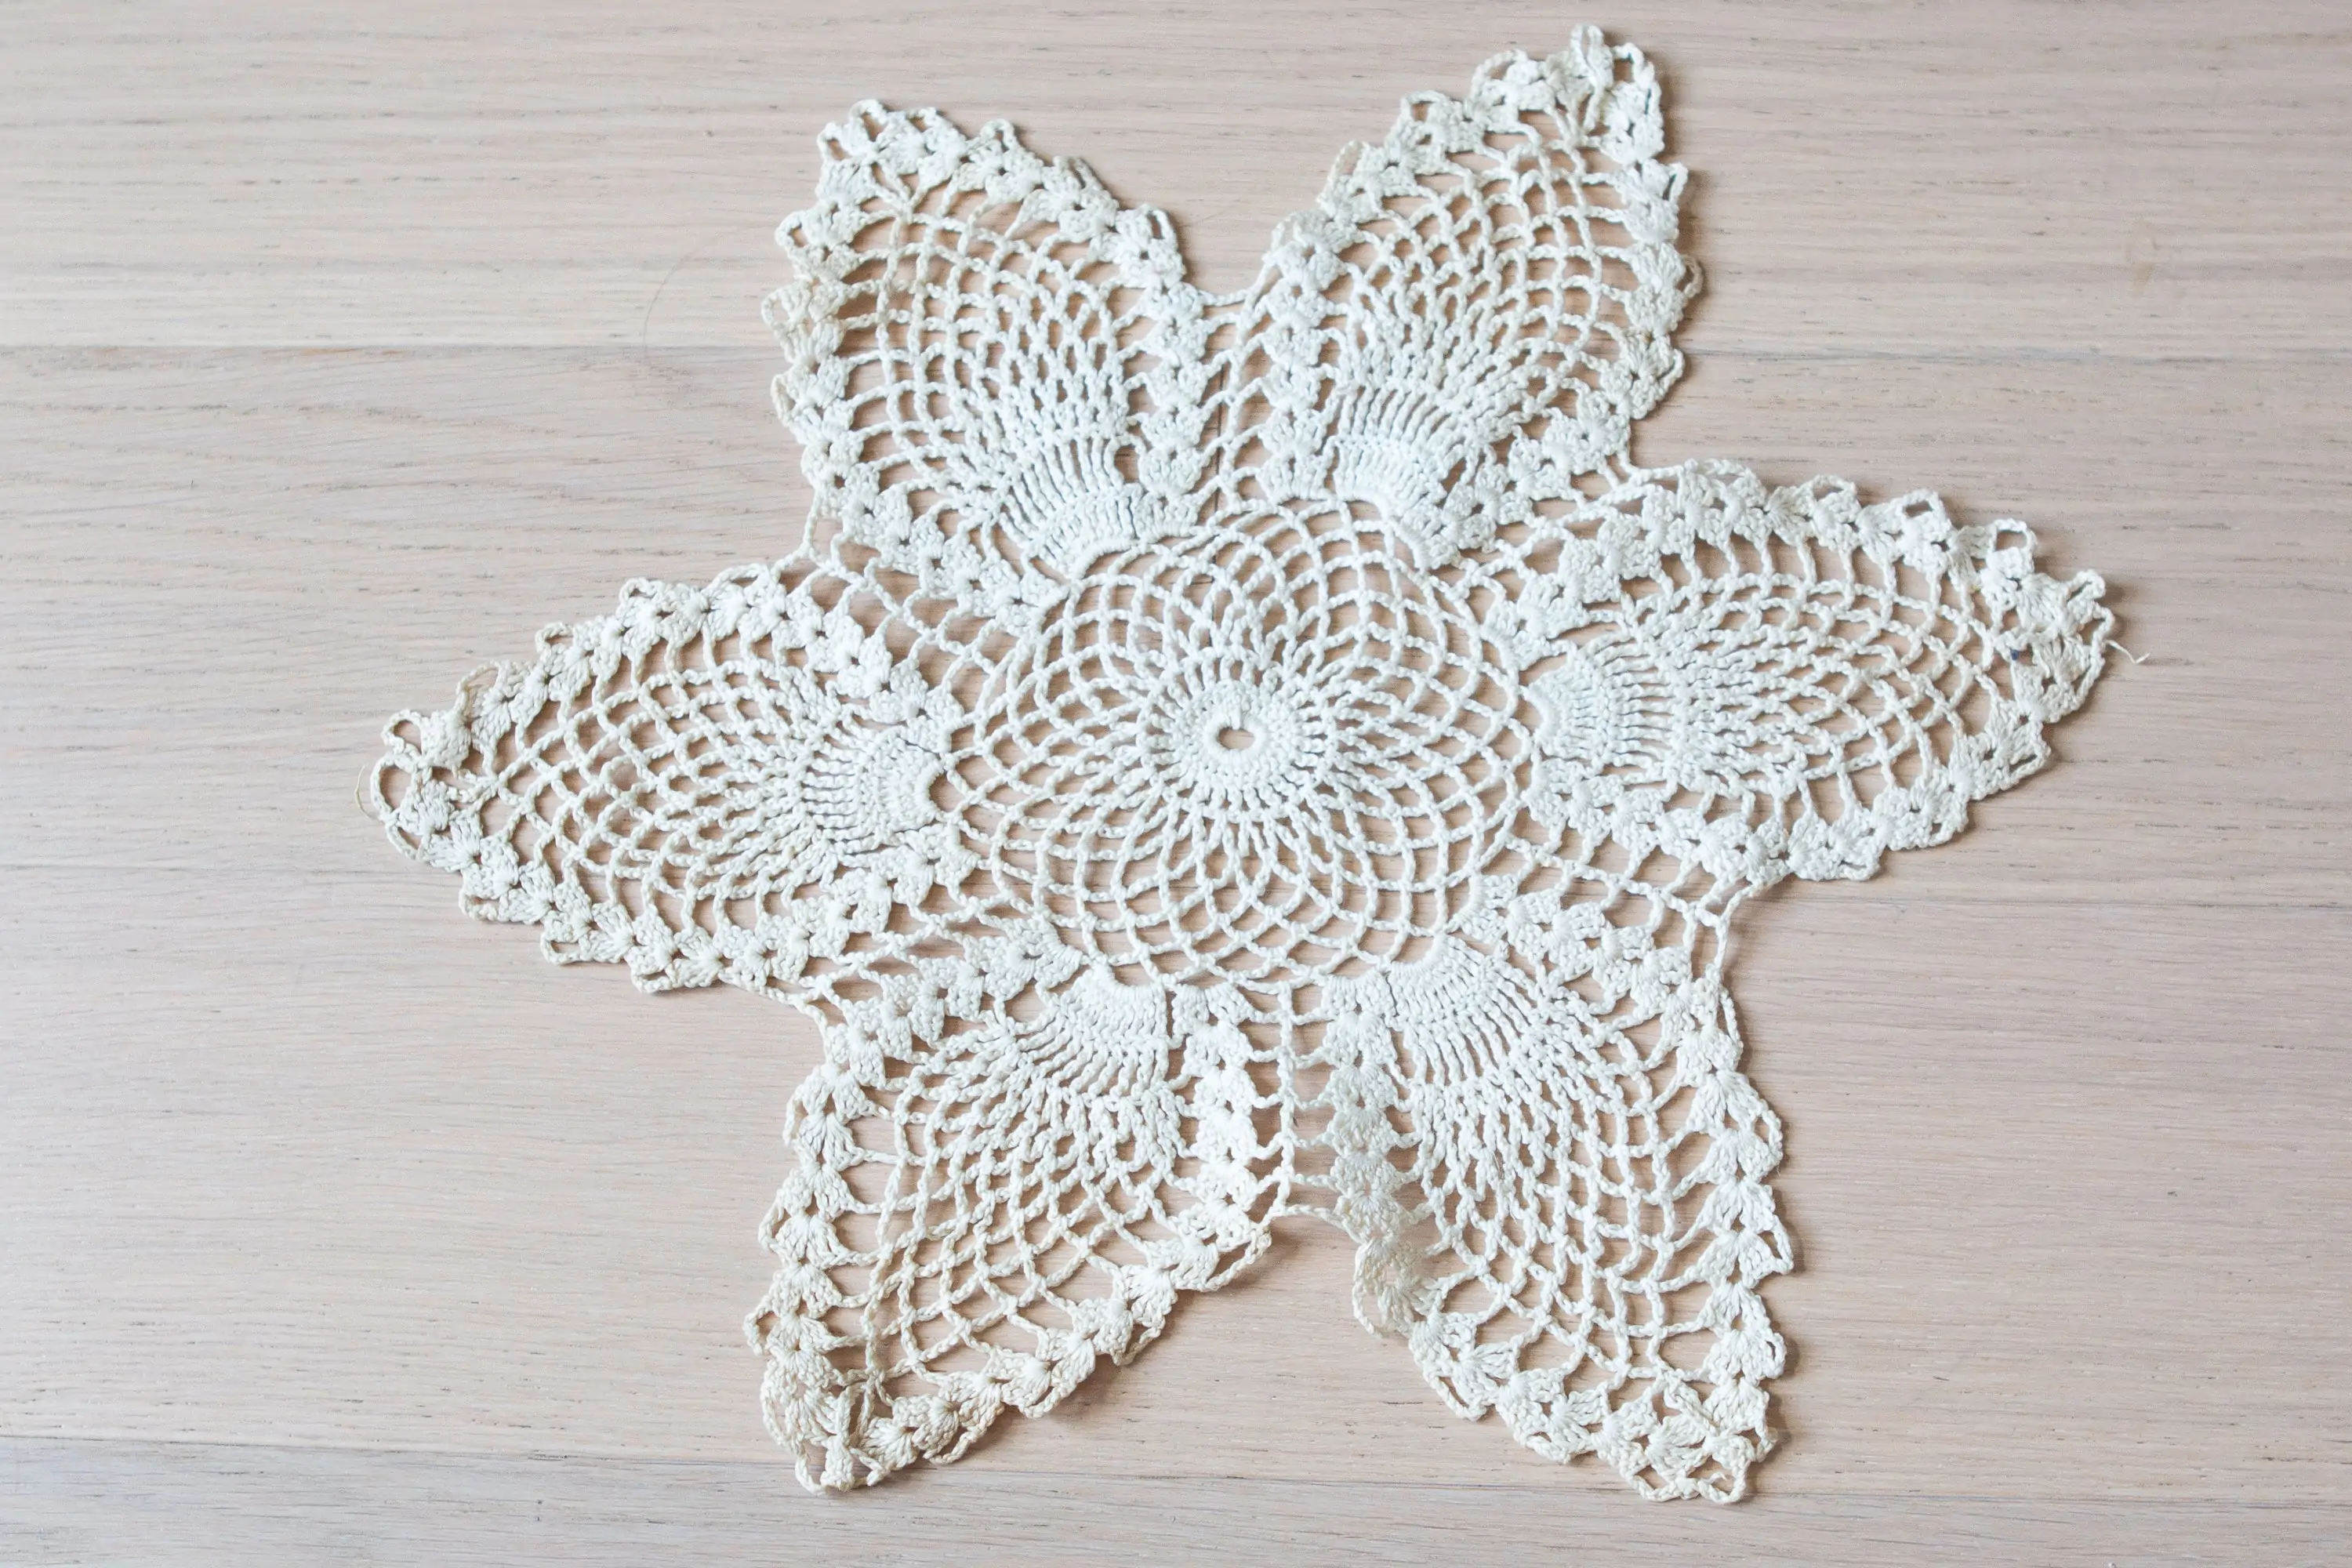 How to clean a crocheted doily